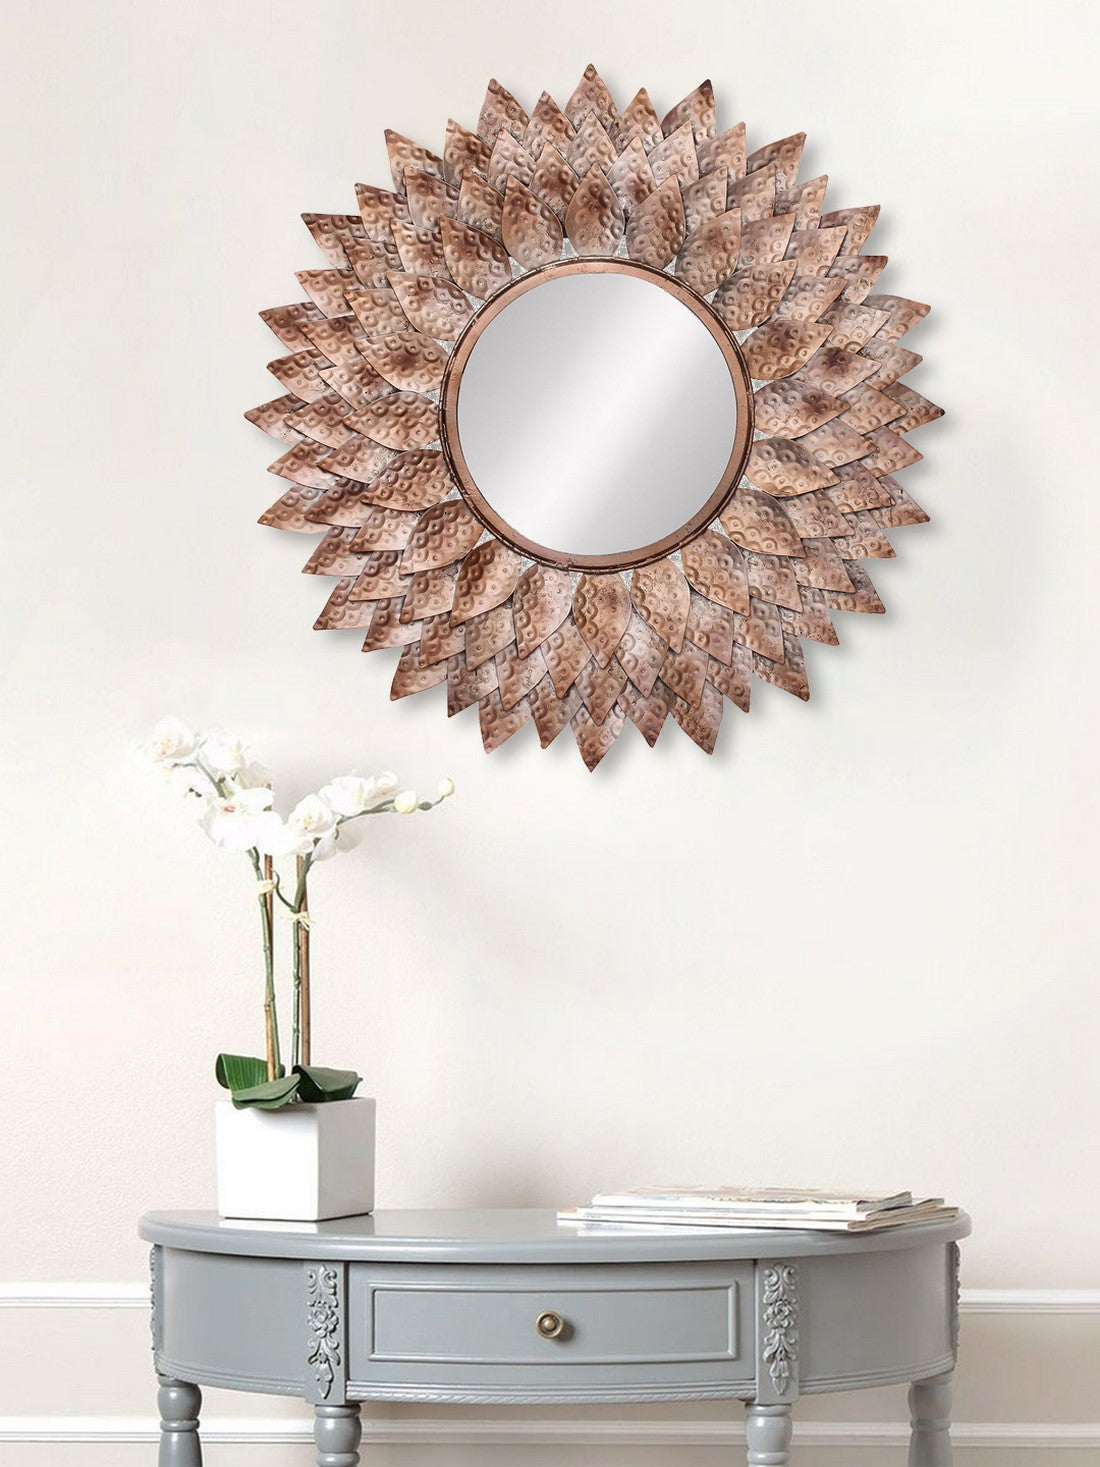 Brown, Copper and Black Decorative Metal Handcarved Wall Mirror